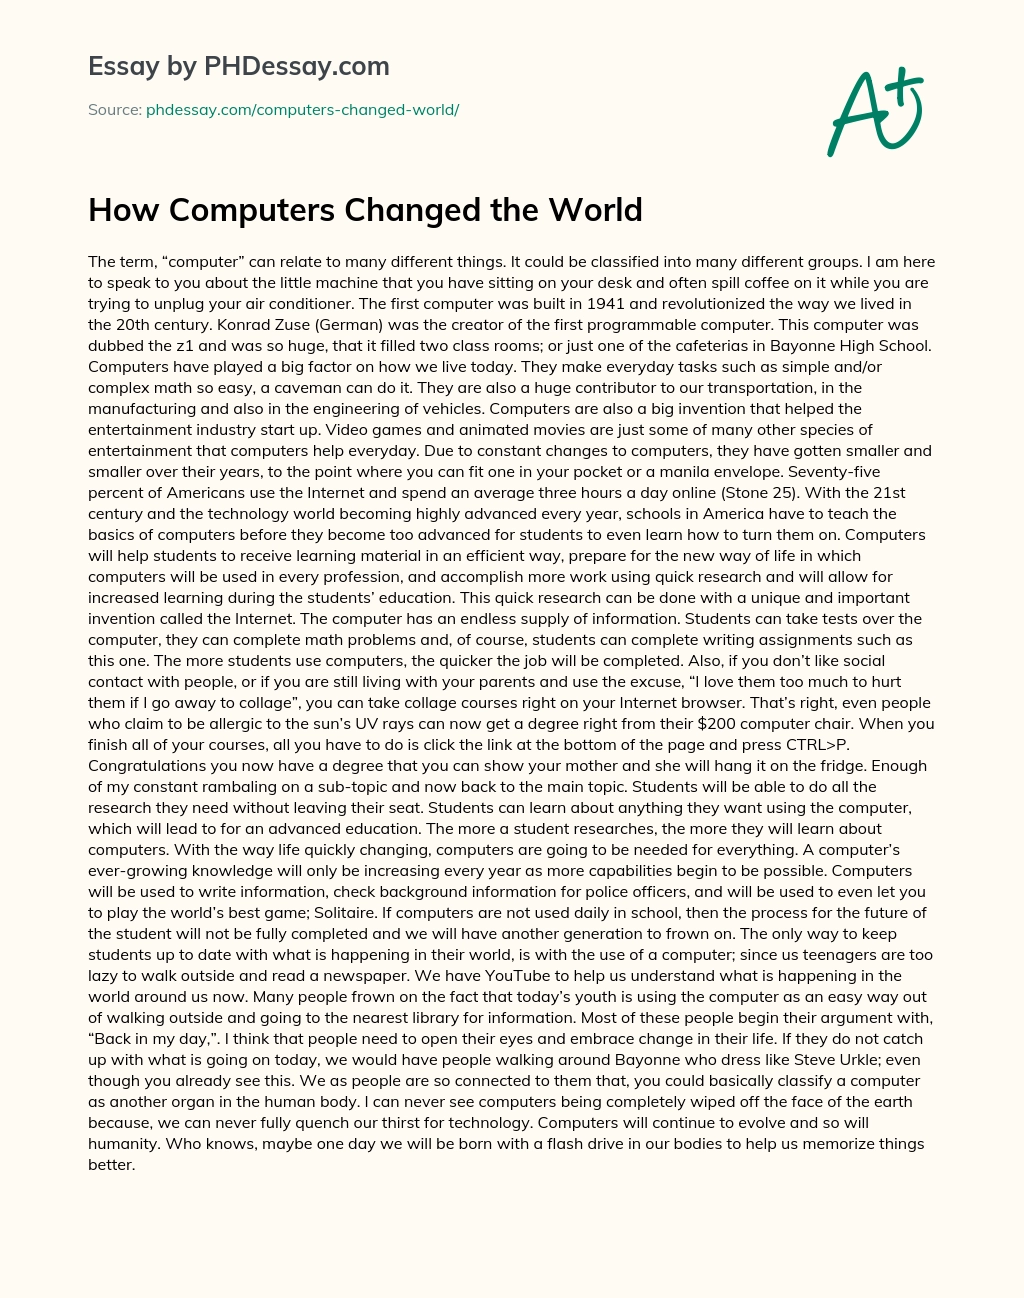 How Computers Changed the World essay